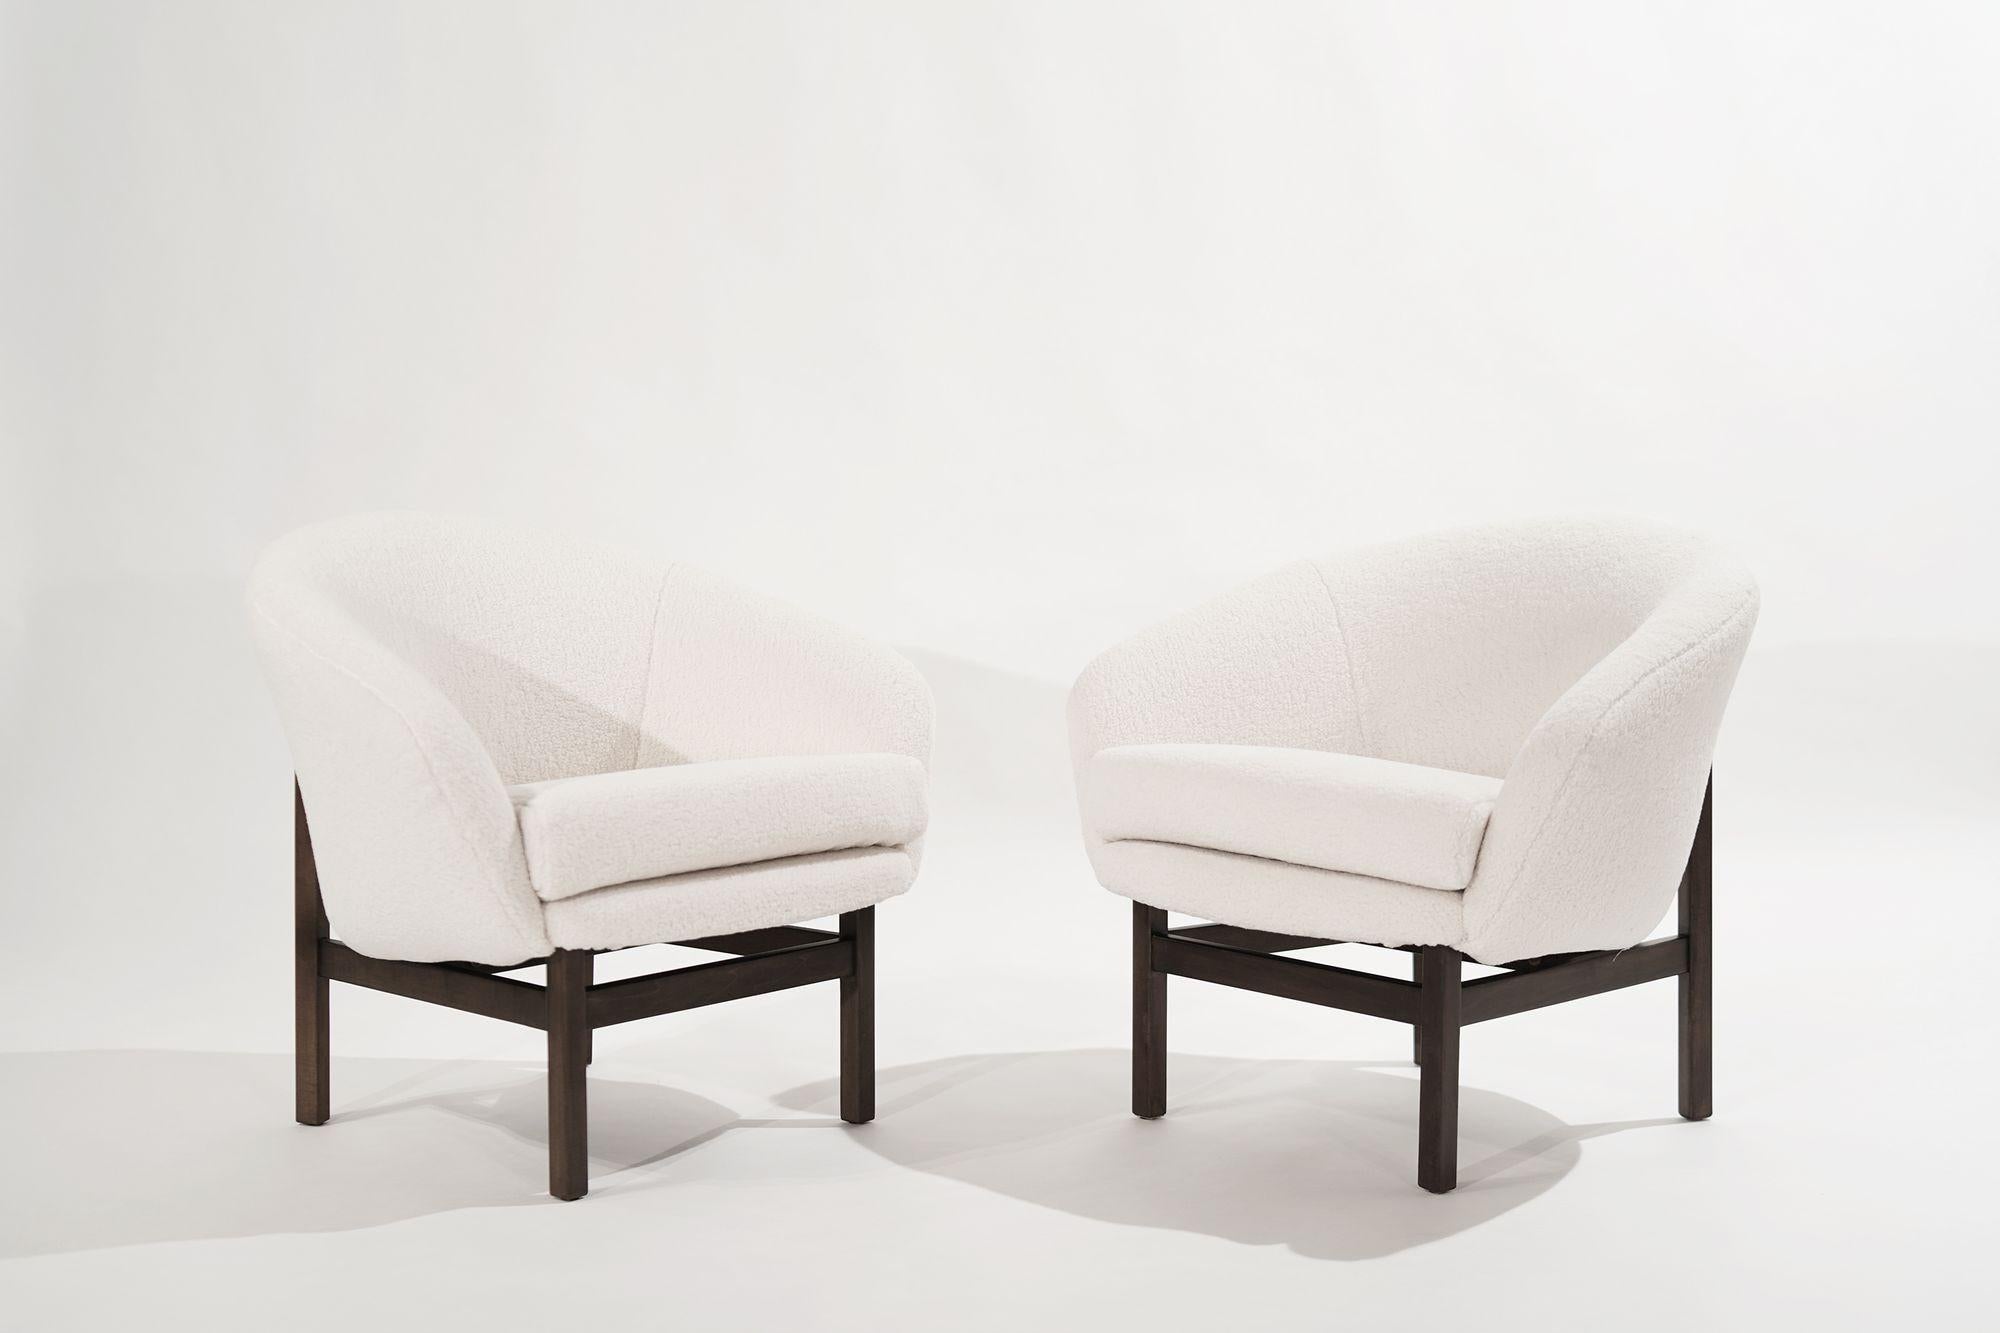 Pair of lounge chairs designed by Lawrence Peabody, circa 1950-1959. Completely restored, all insides including foam, straps, and dacron have been fully updated. Reupholstered in heavy wool by Kravet.
 
Other designers from this period include